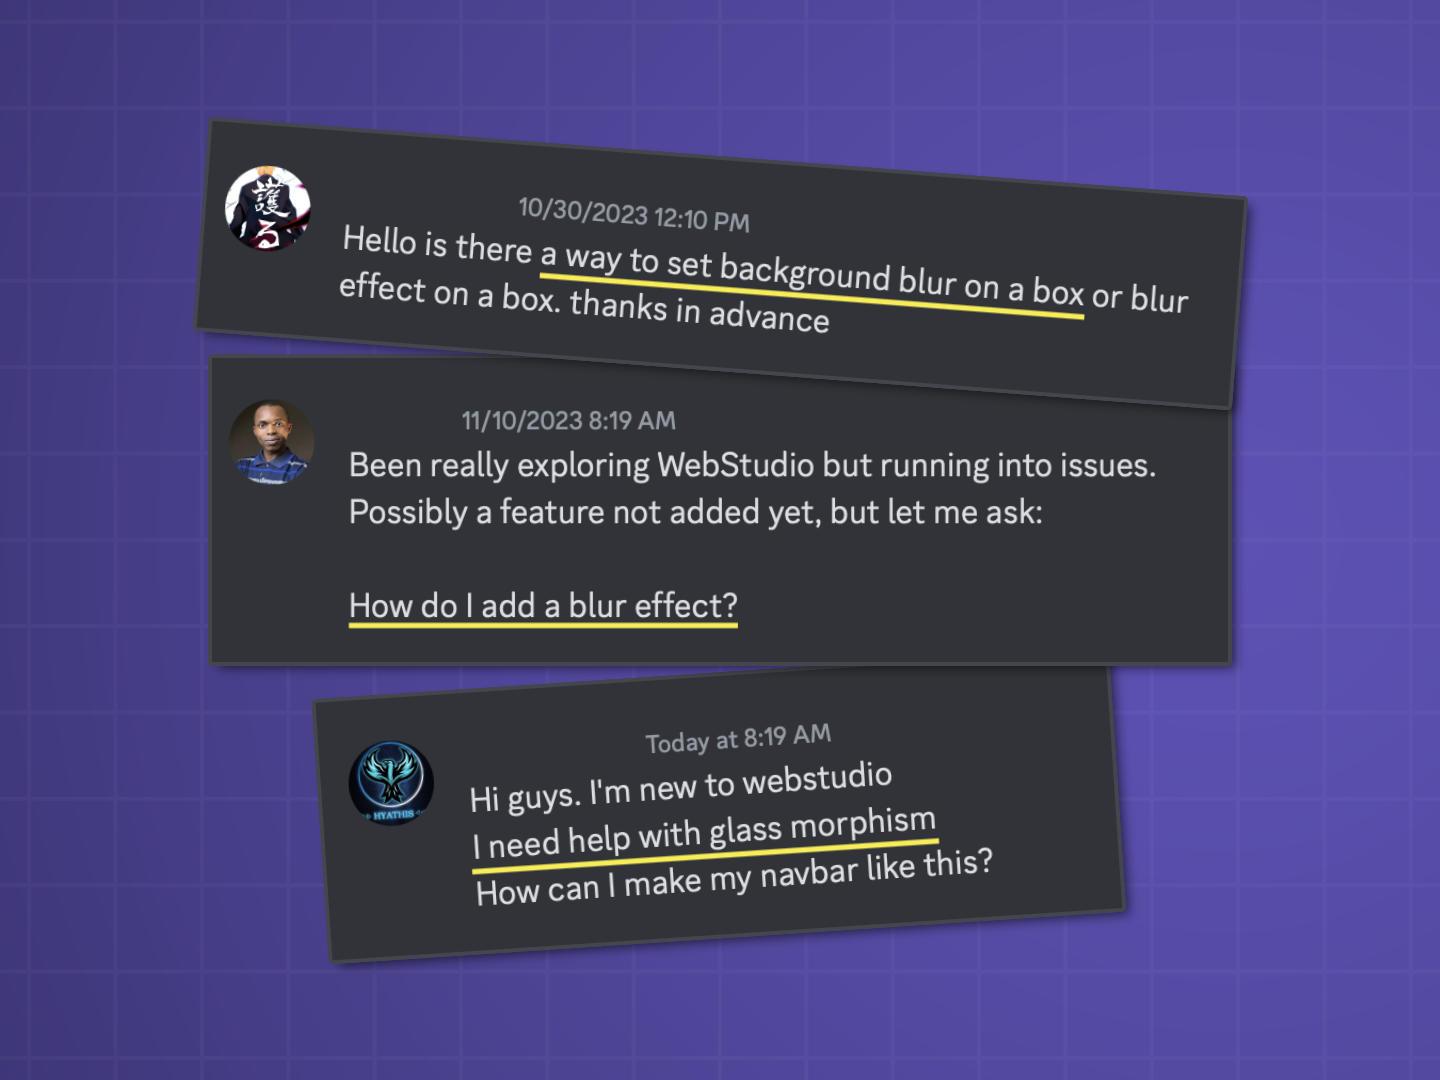 People asking how to add blur on Webstudio via Discord